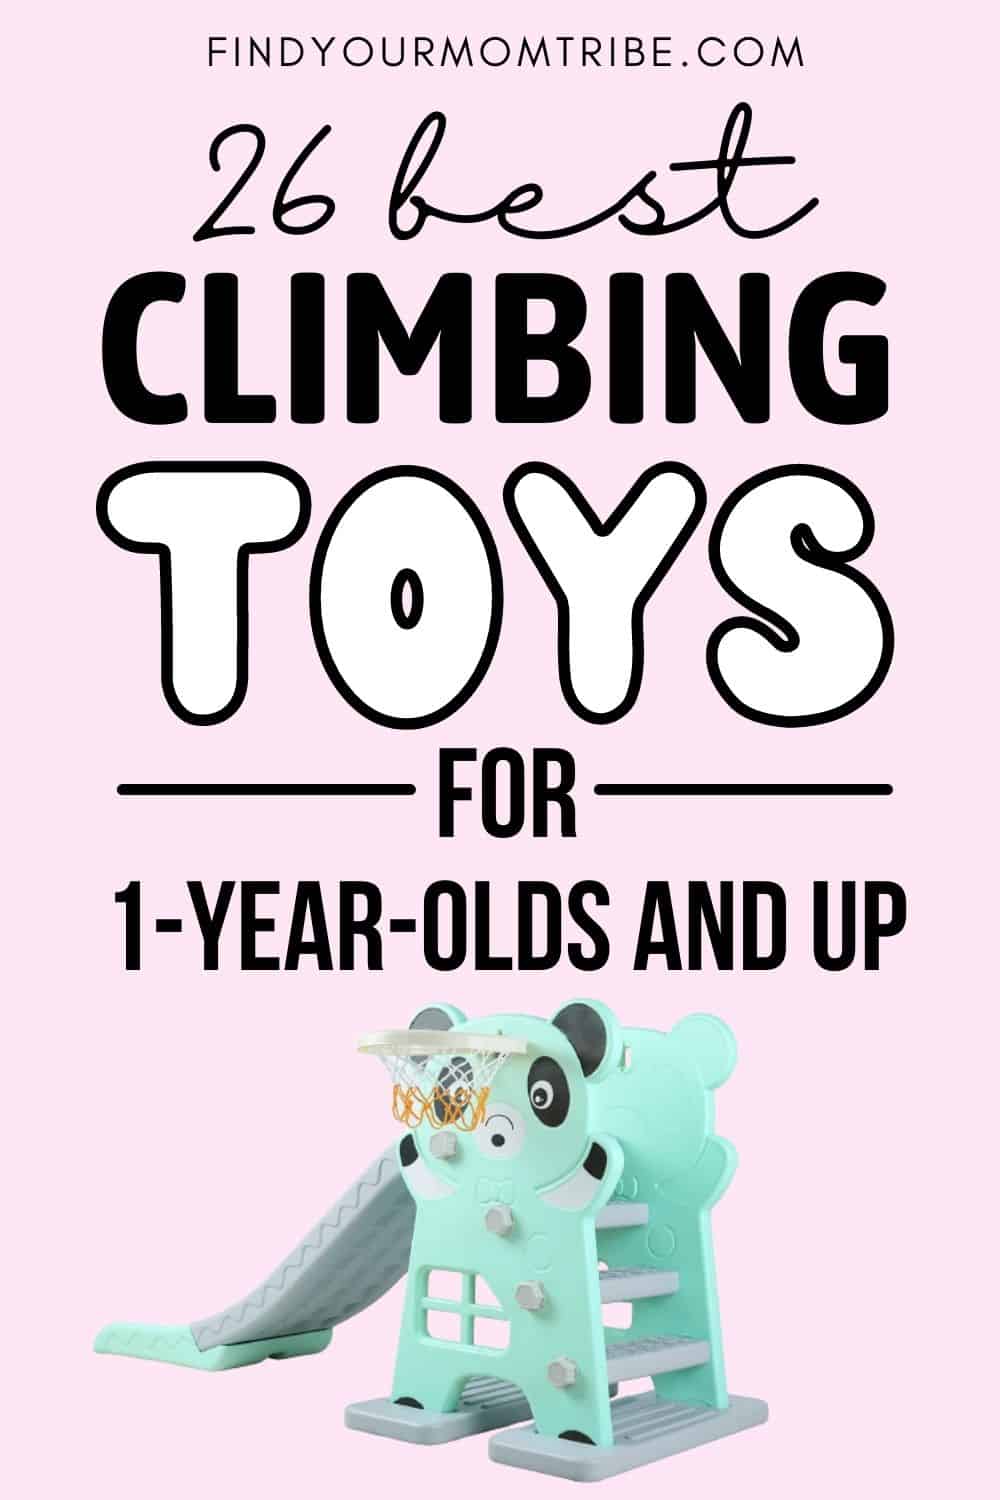 26 Best 1-Year-Old Climbing Toys Pinterest